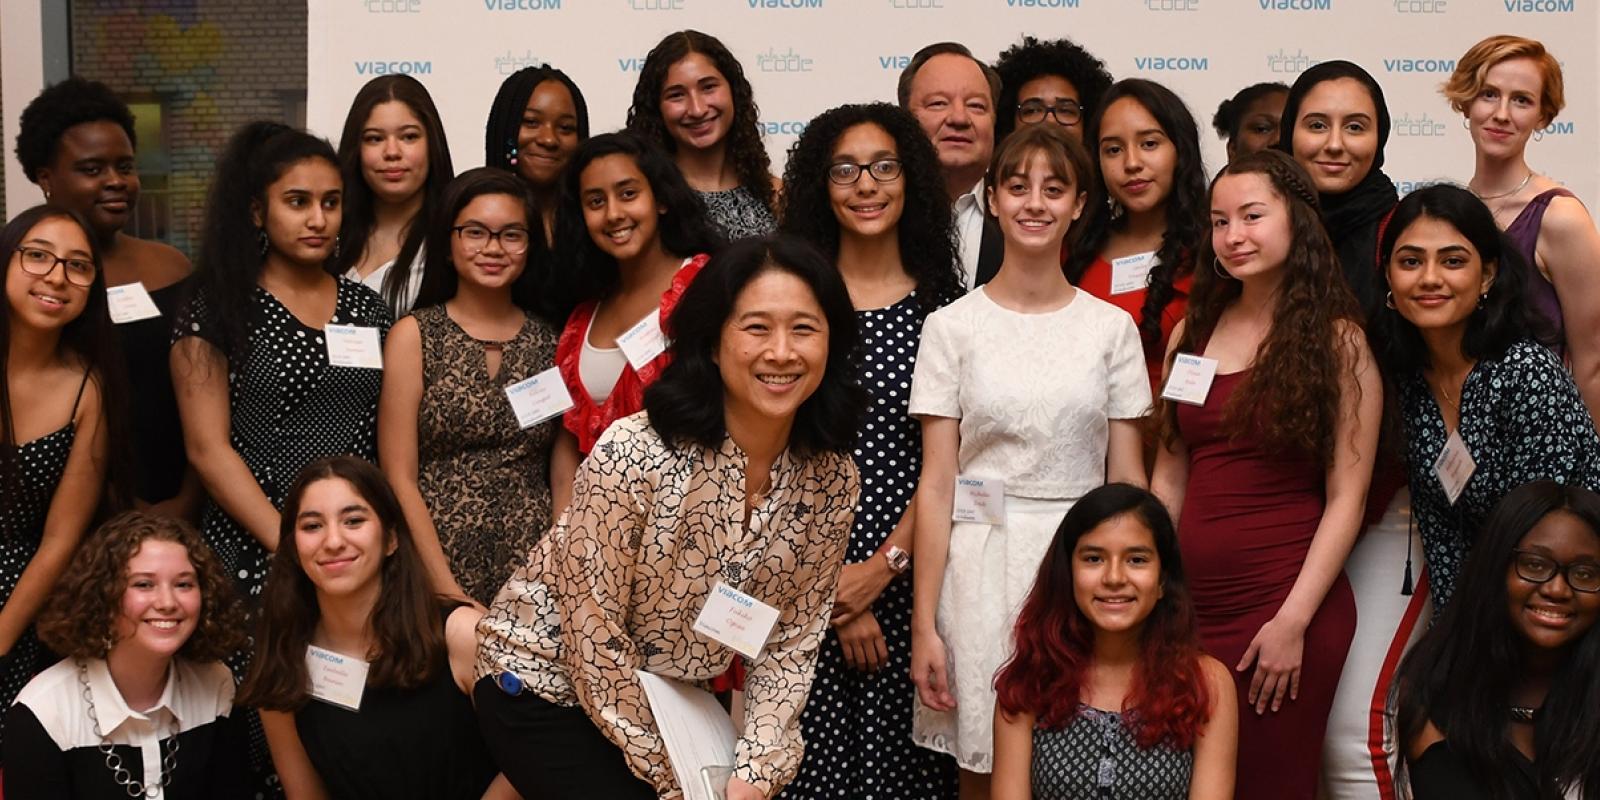 With Girls Who Code, Viacom Develops a Pipeline of Future Tech Leaders